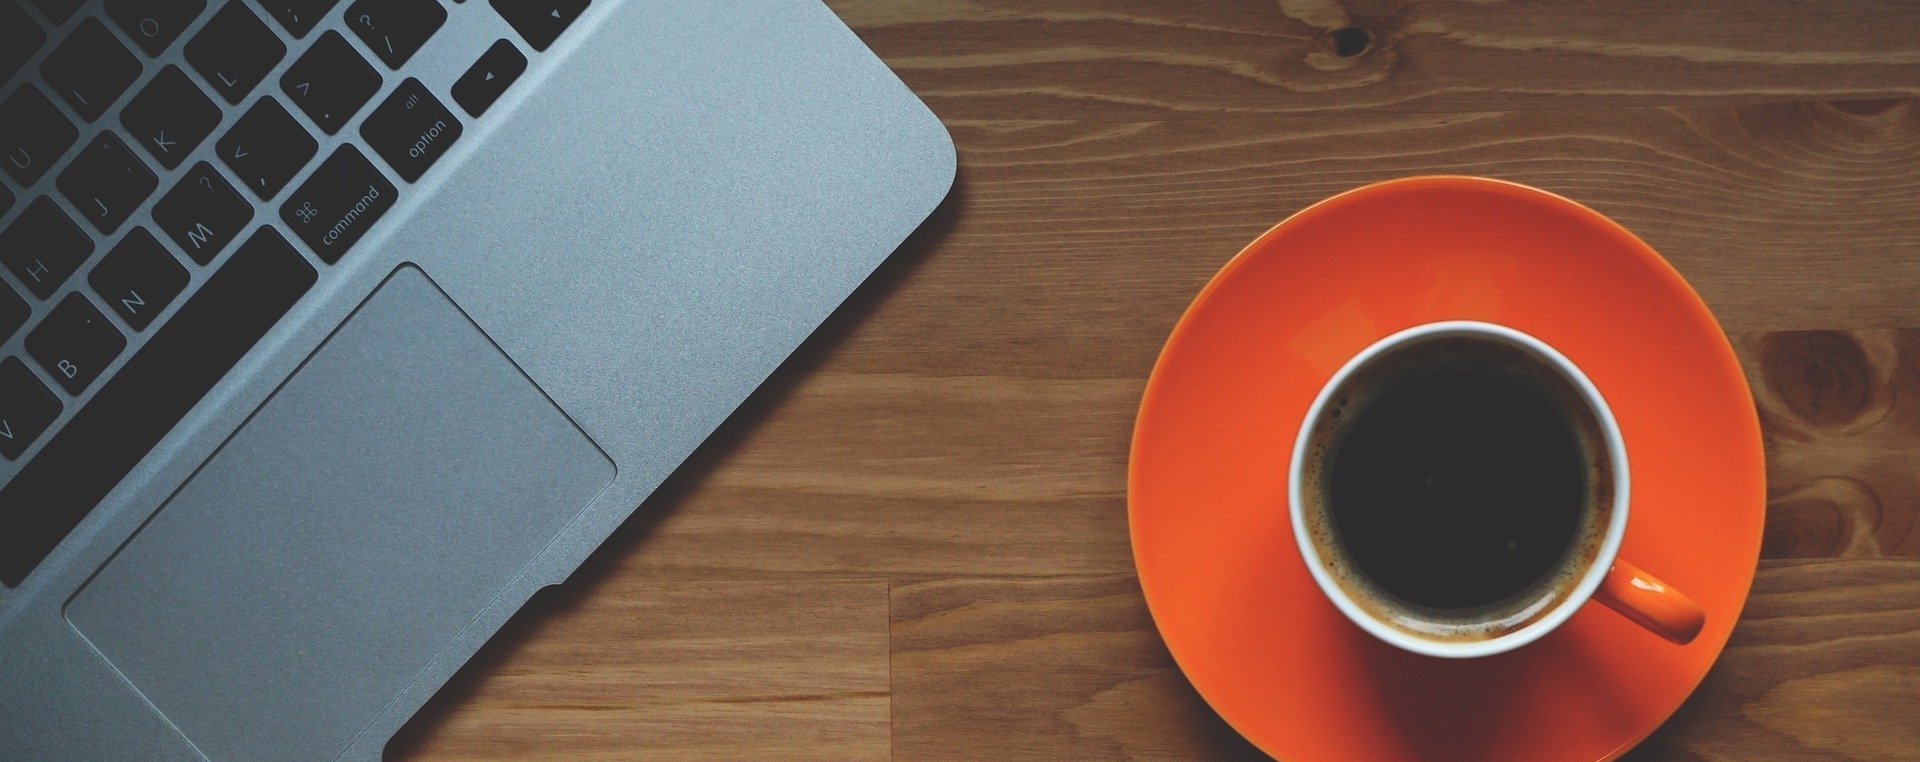 A coffee cup on a table next to a laptop